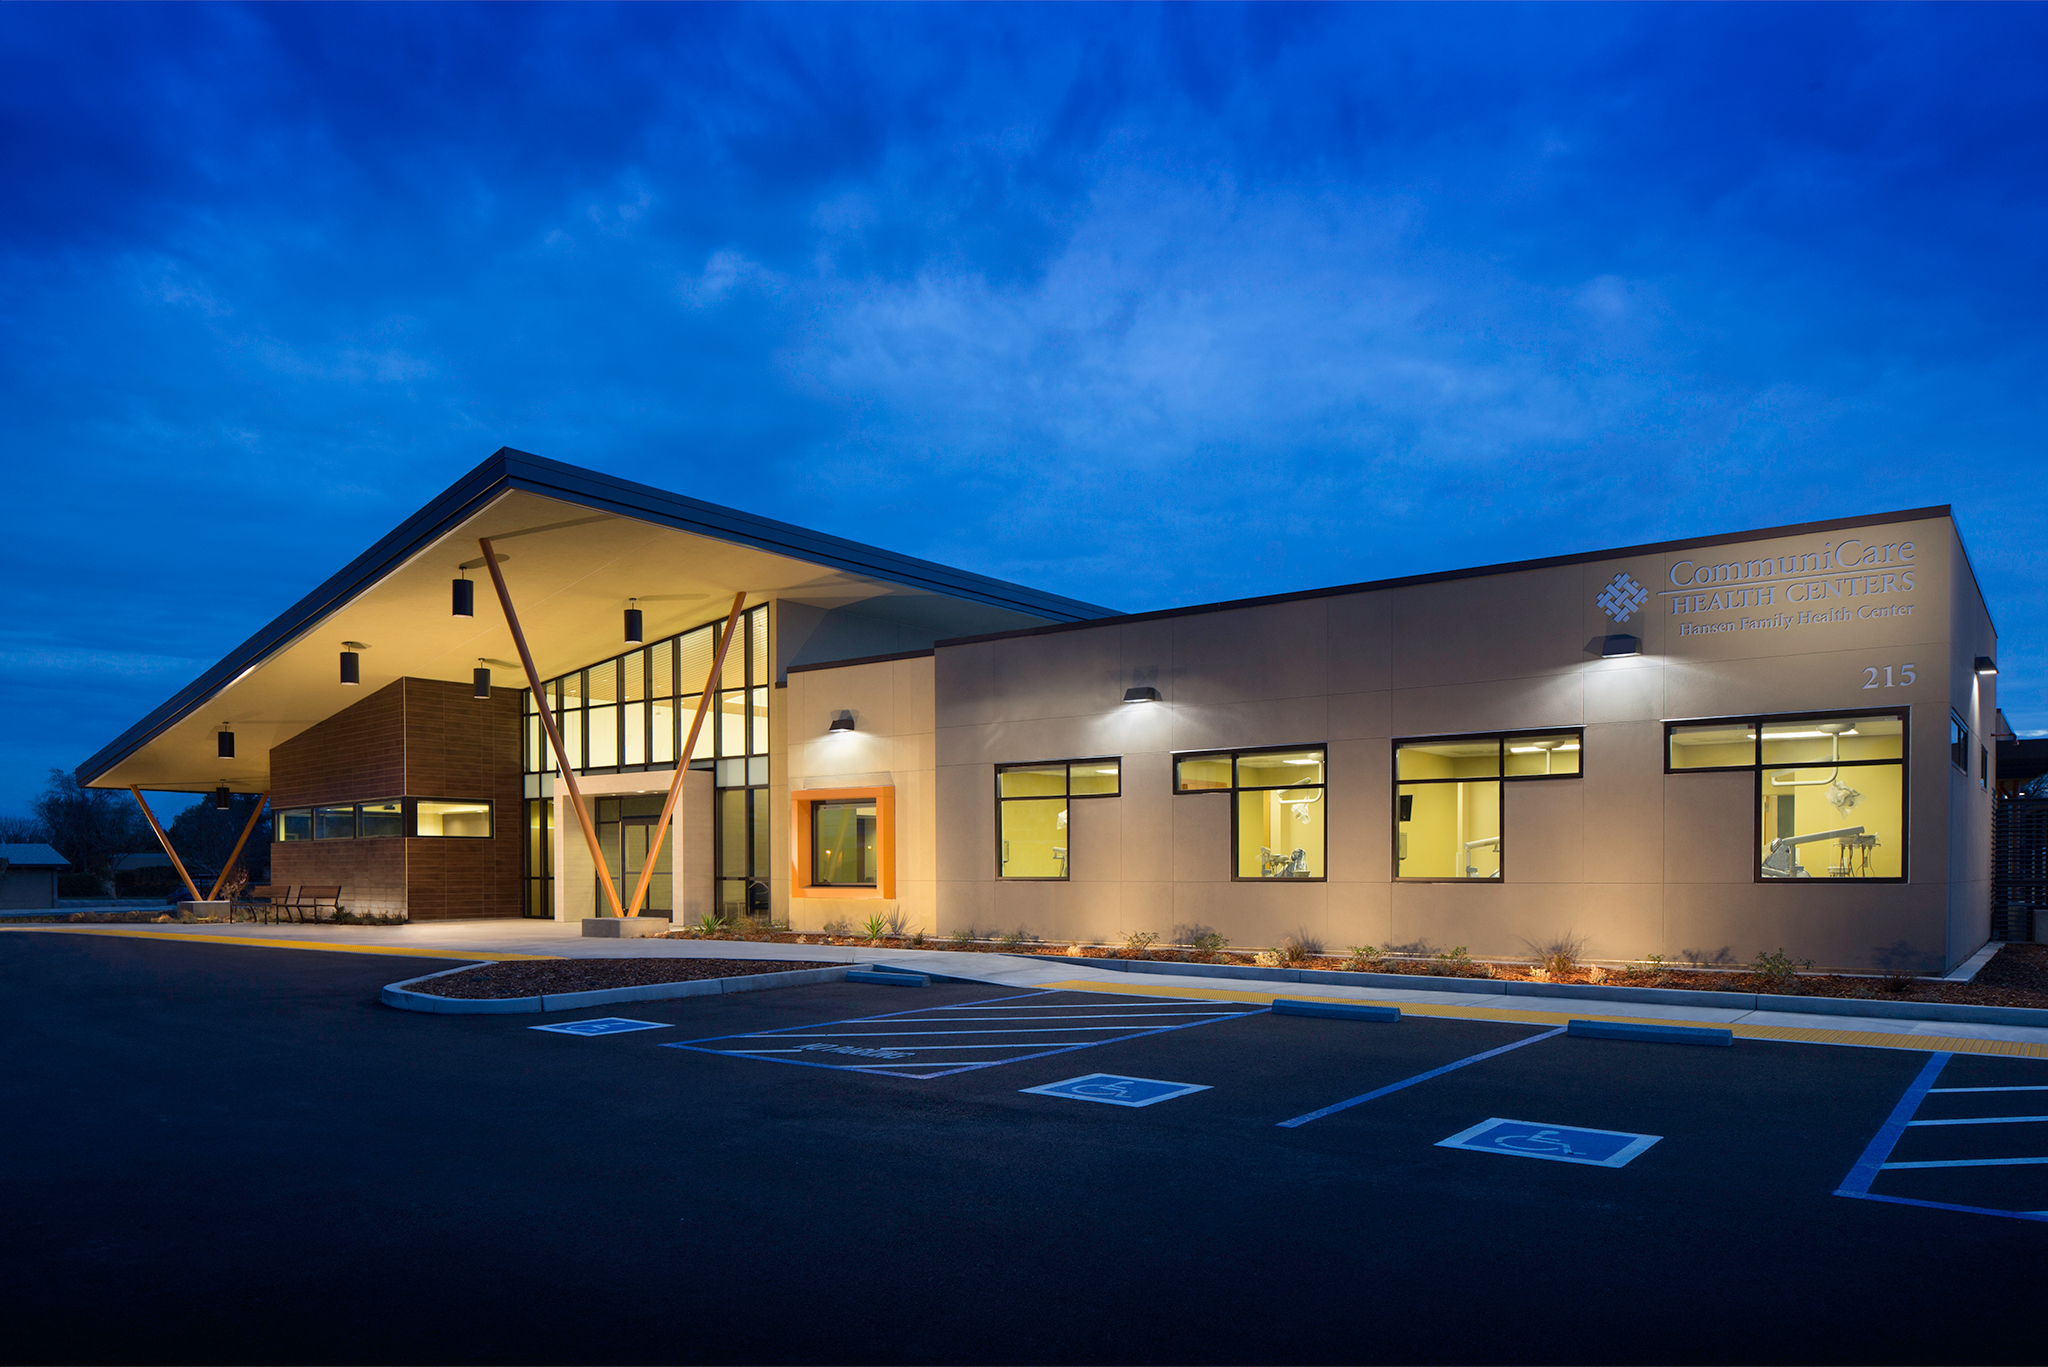 CommCare Exterior at Night